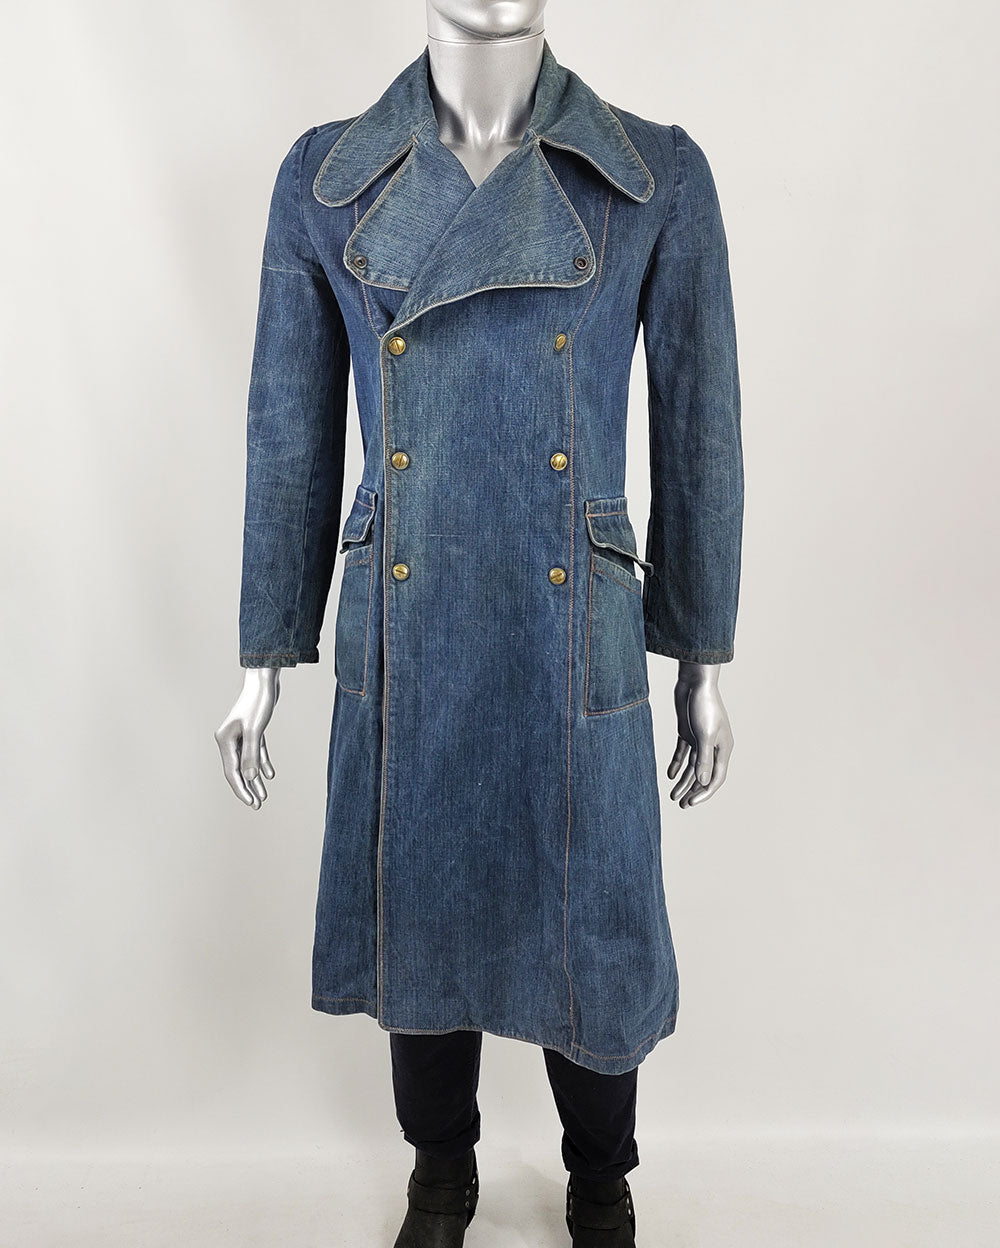 Vintage 1970s blue denim peacoat by The Wild Mustang Co.